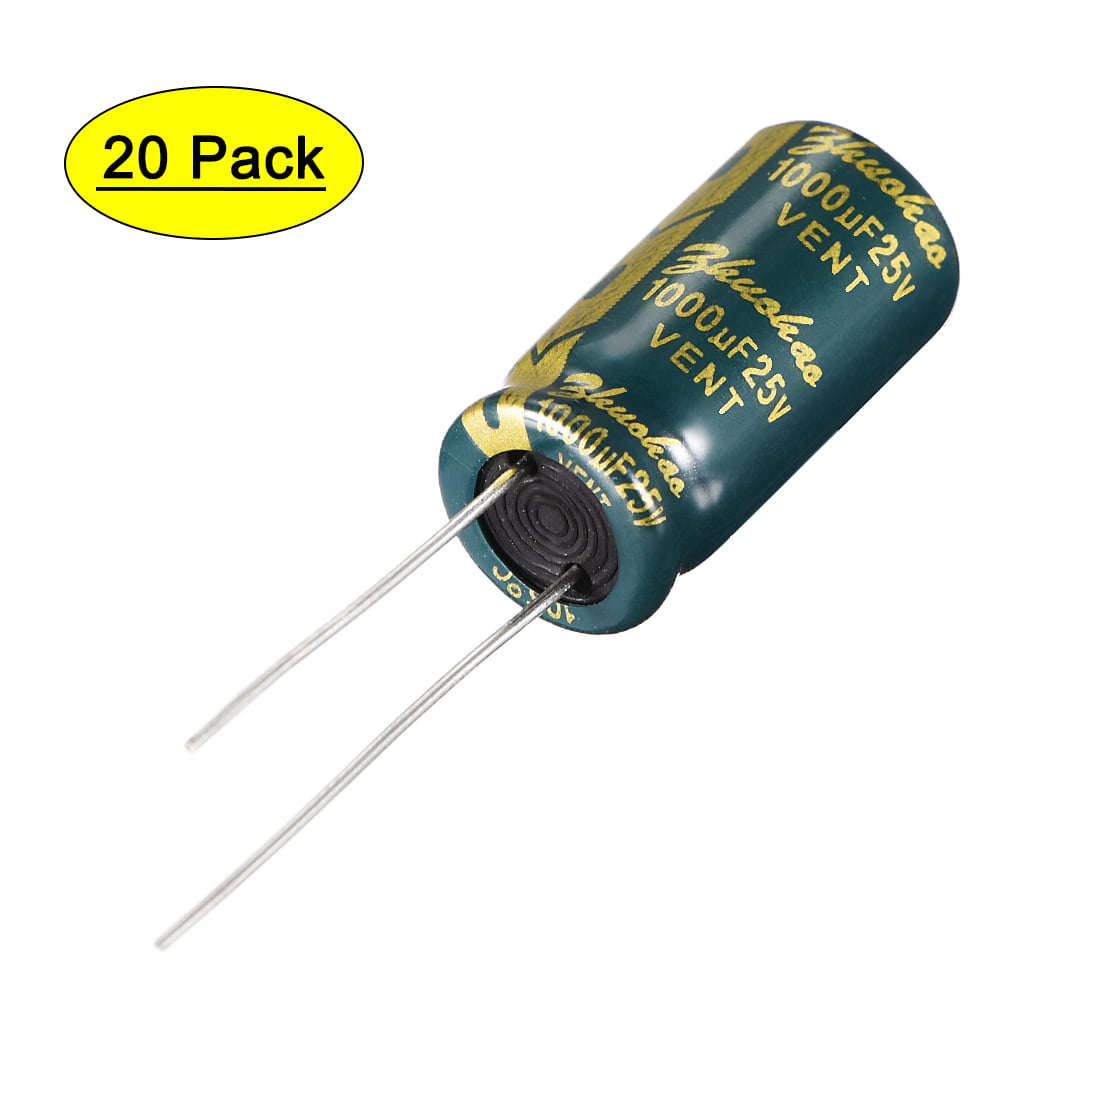 50V 4.7uF Electrolytic Radial Capacitors 105°C ±20%  5mm x 11mm  various pack